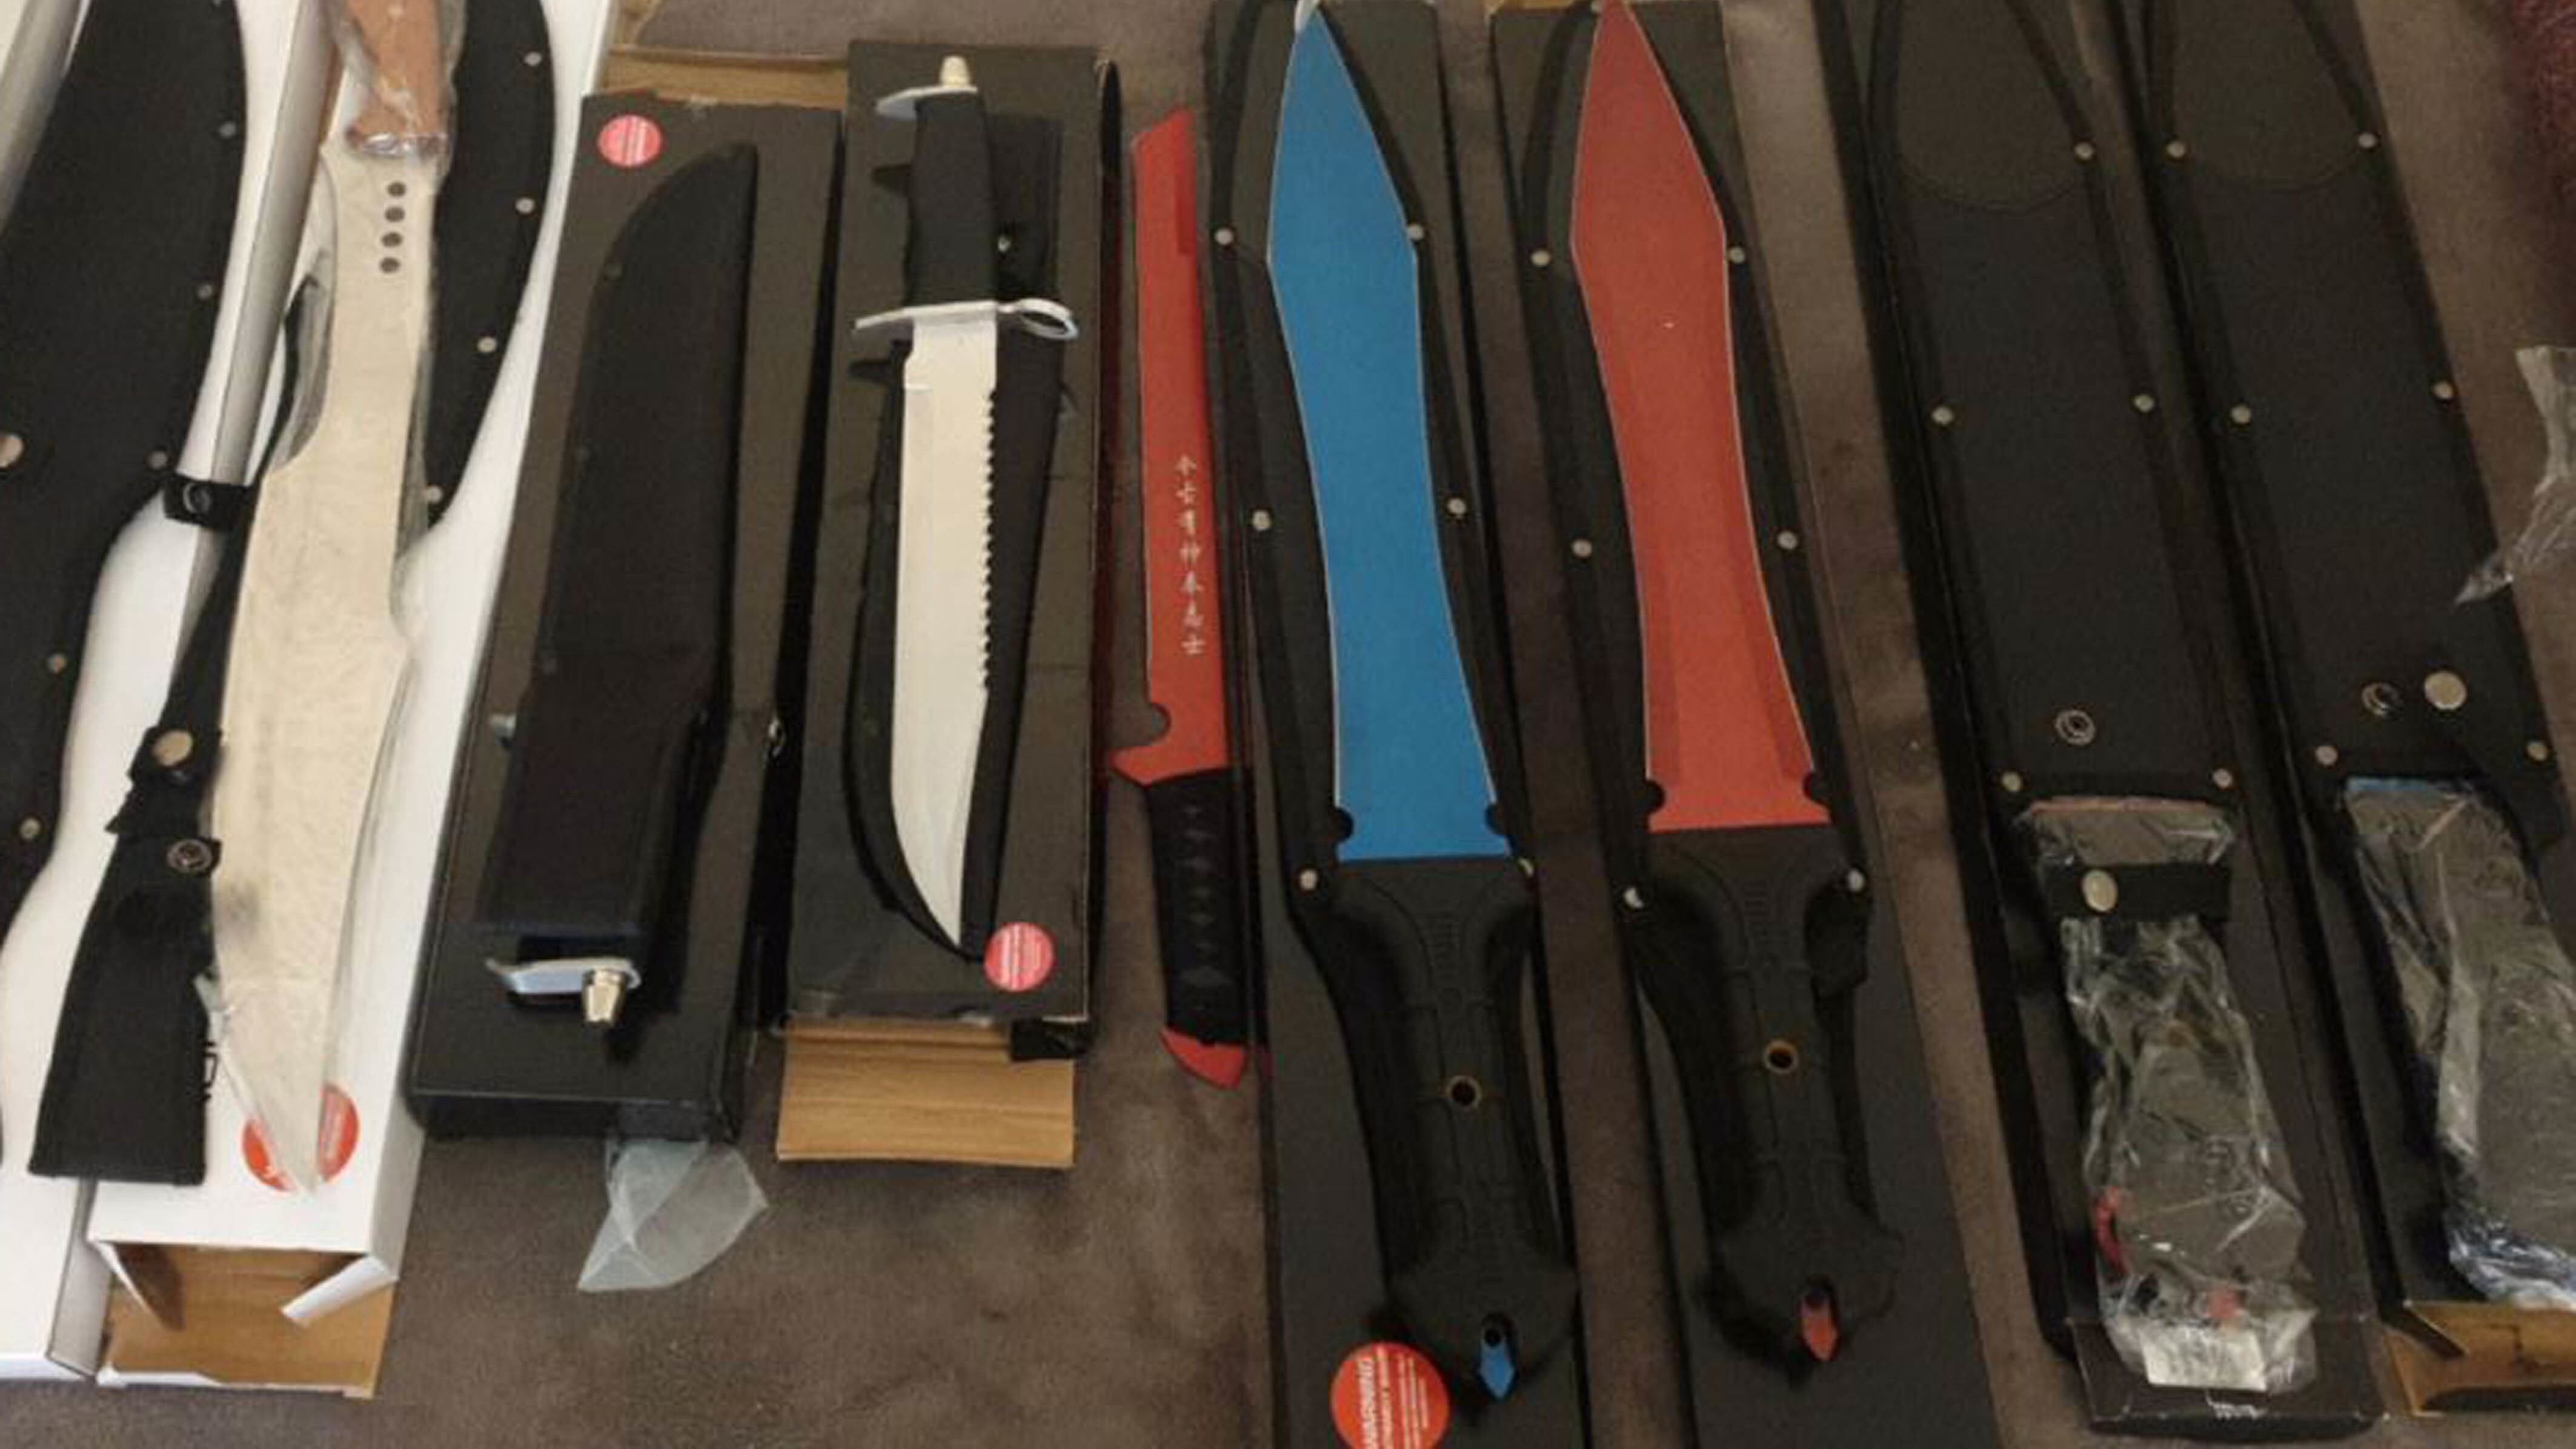 Police uncovered a Snapchat photograph of nine knives lined up on the defendant’s bed